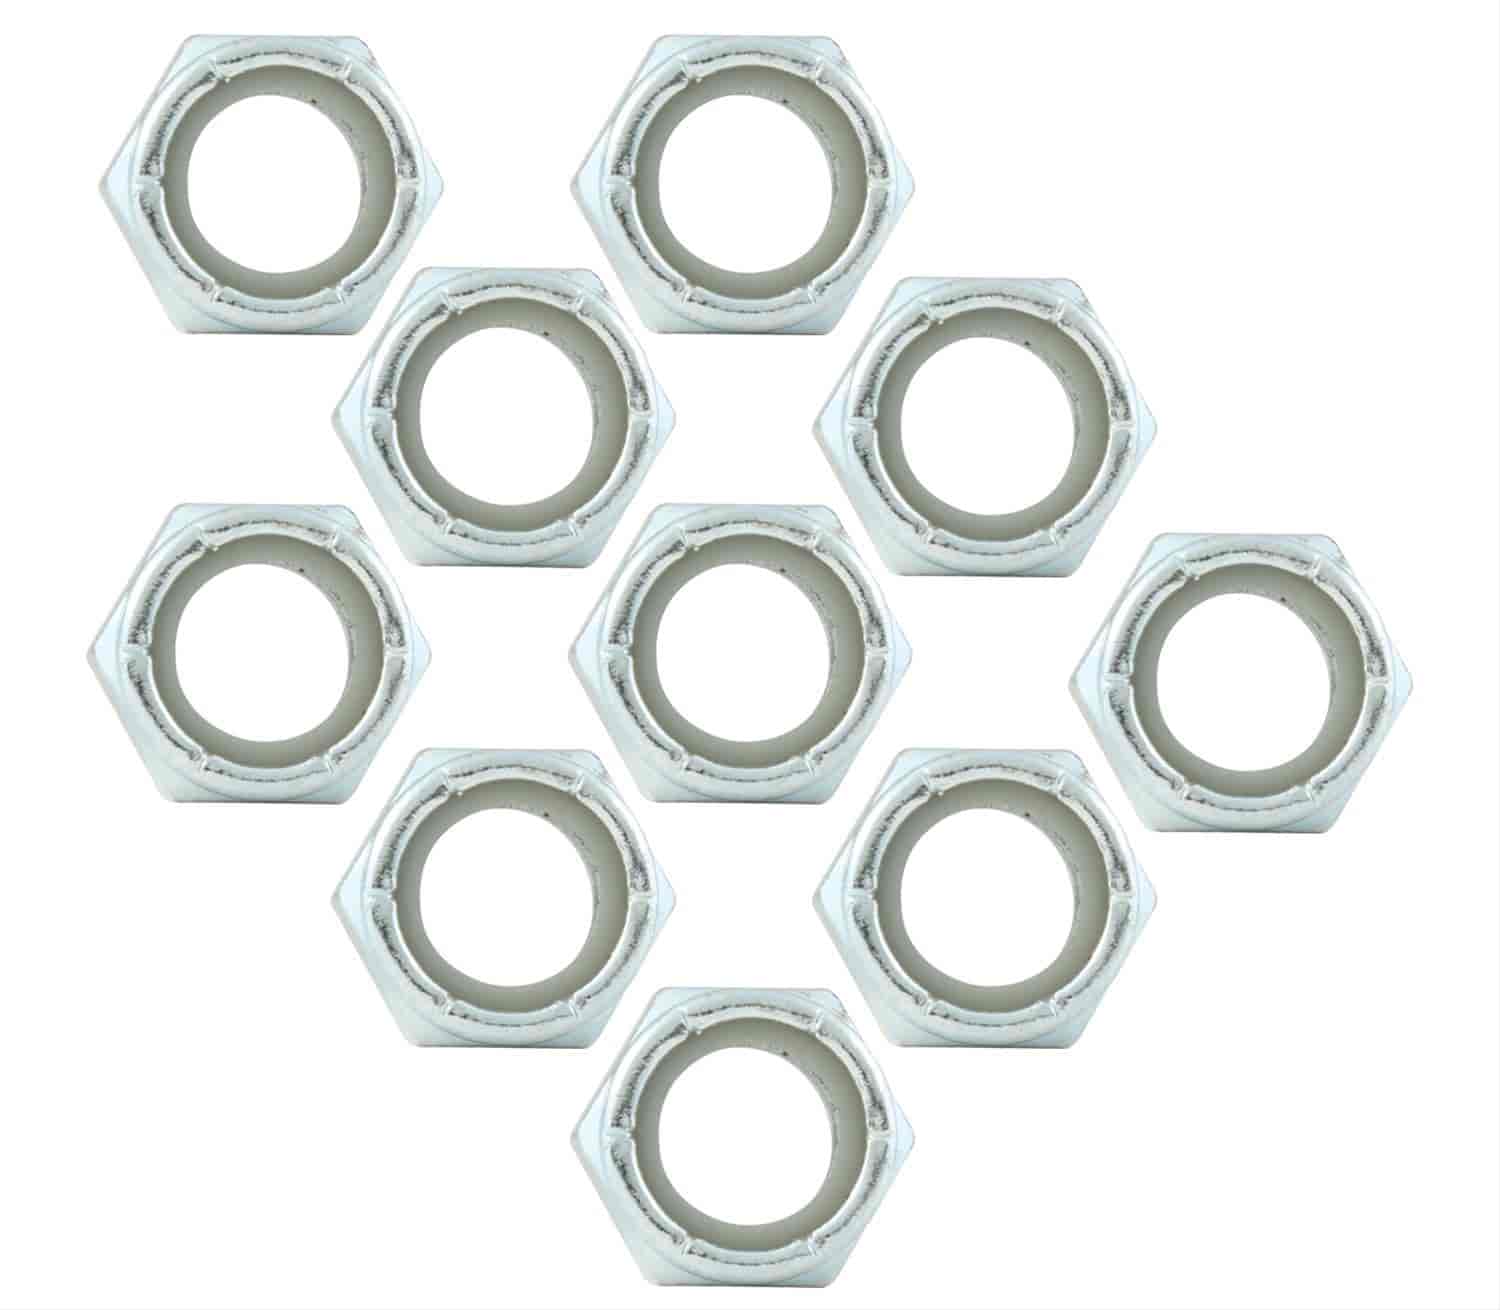 Fine Thread Hex Nuts With Nylon Inserts 5/8"-18